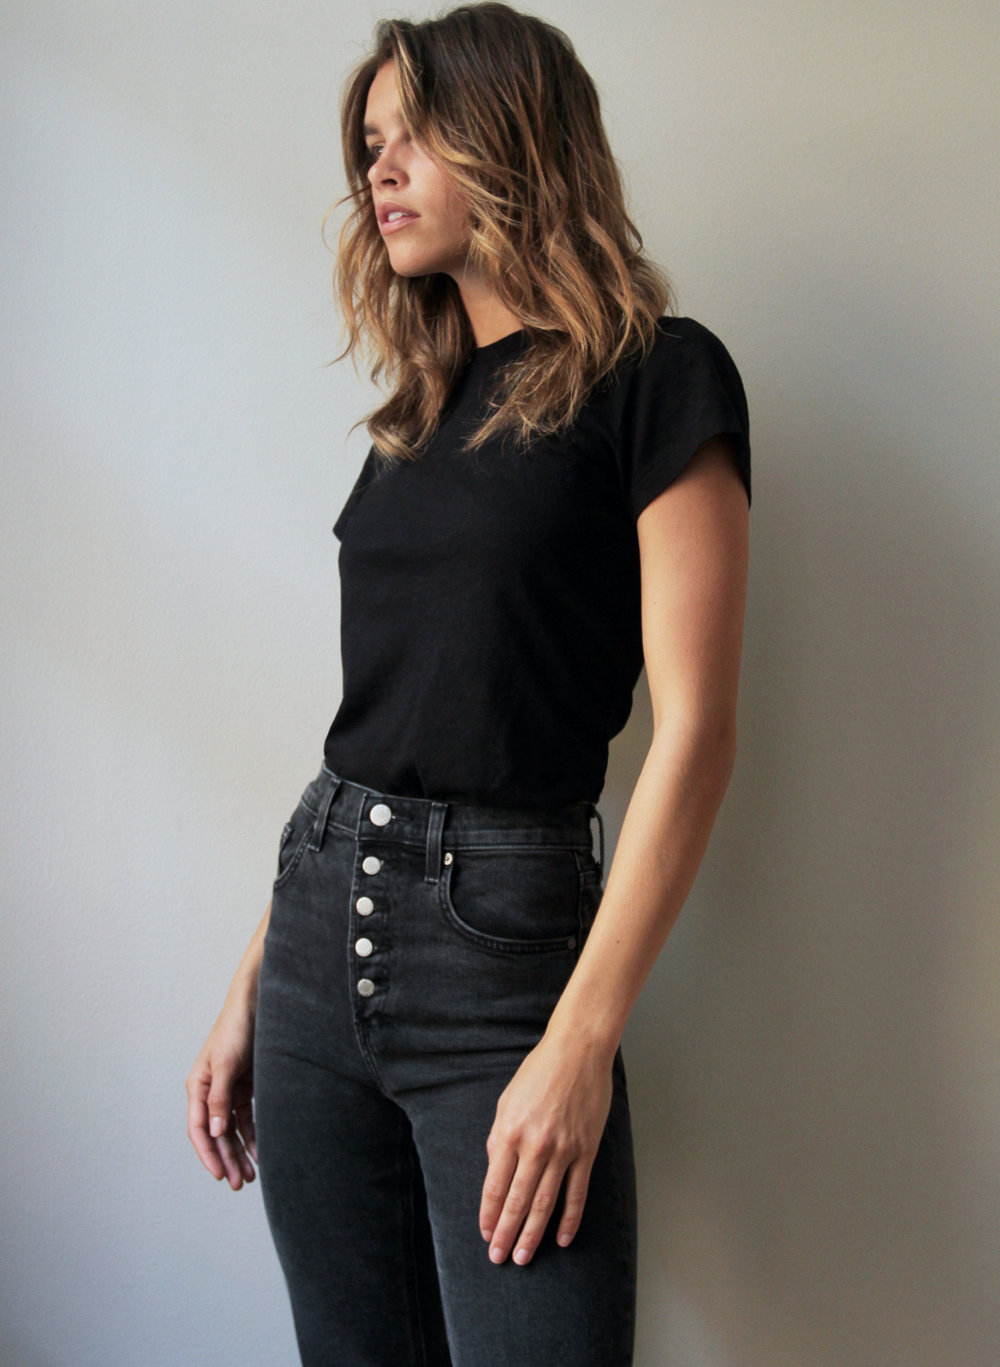 Buy > black high waisted button jeans > in stock